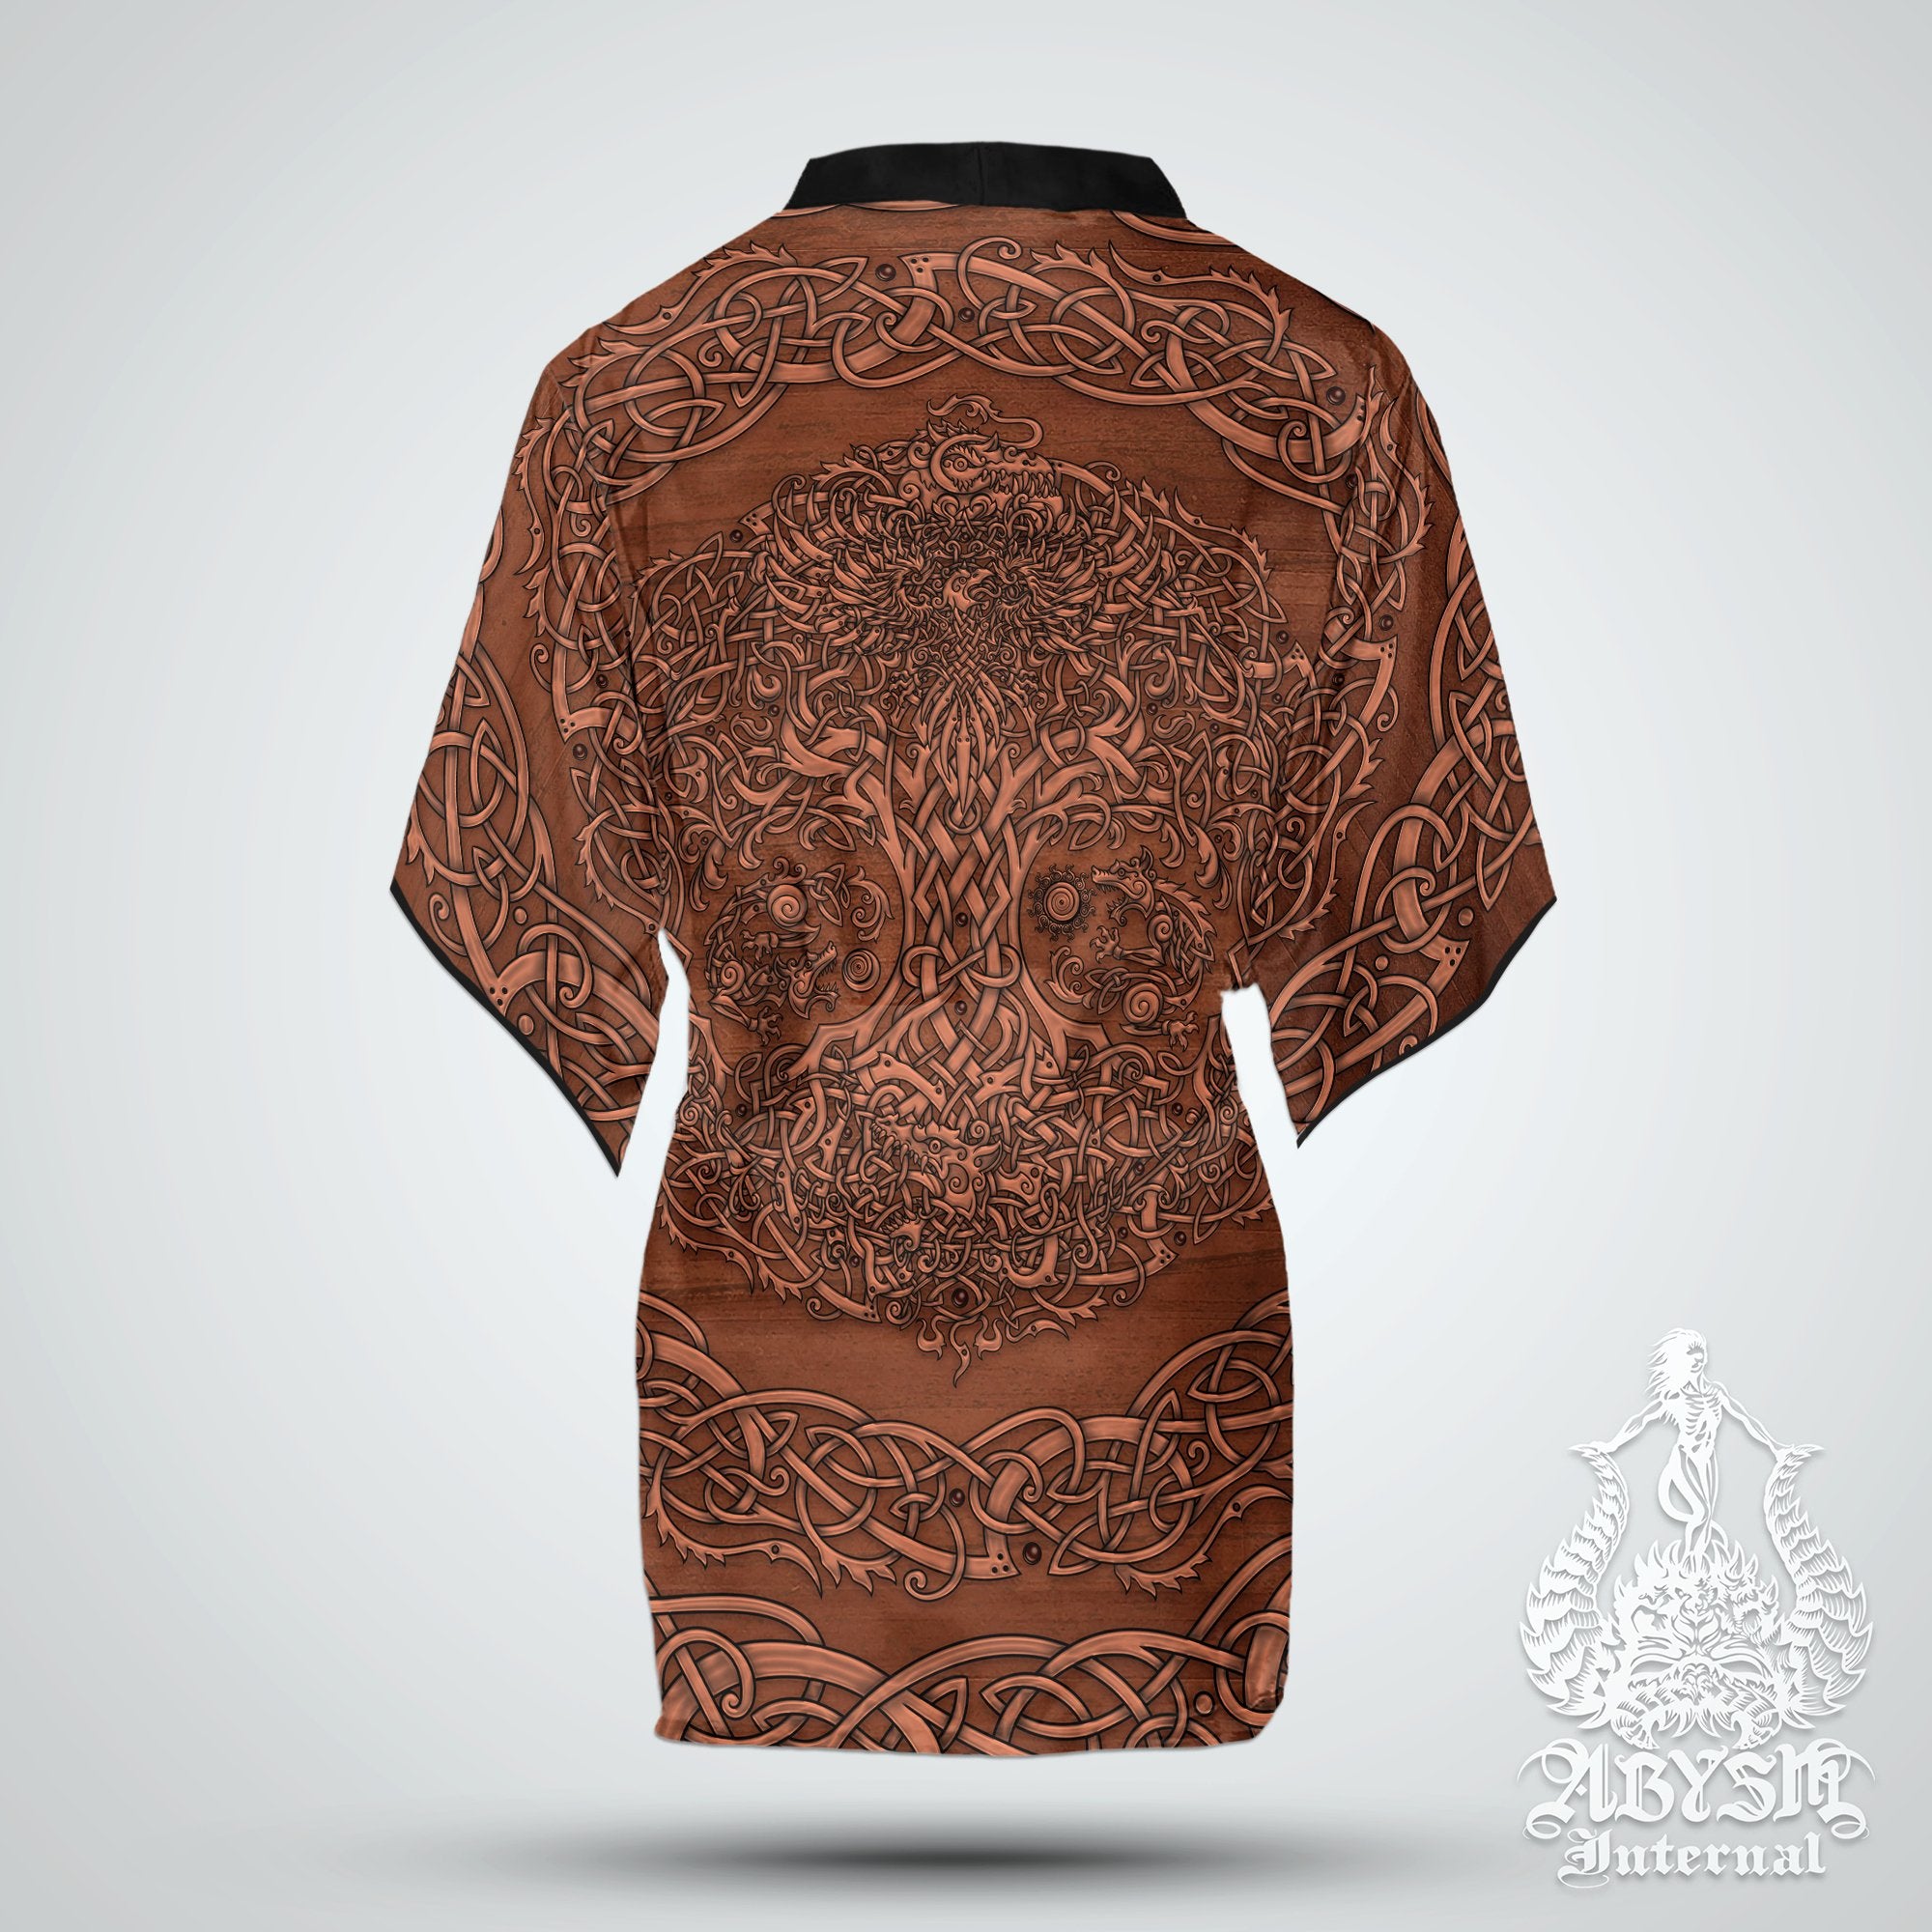 Viking Short Kimono Robe, Beach Party Outfit, Yggdrasil Coverup, Summer Festival, Alternative Norse Clothing, Unisex - Tree of Life, Wood - Abysm Internal